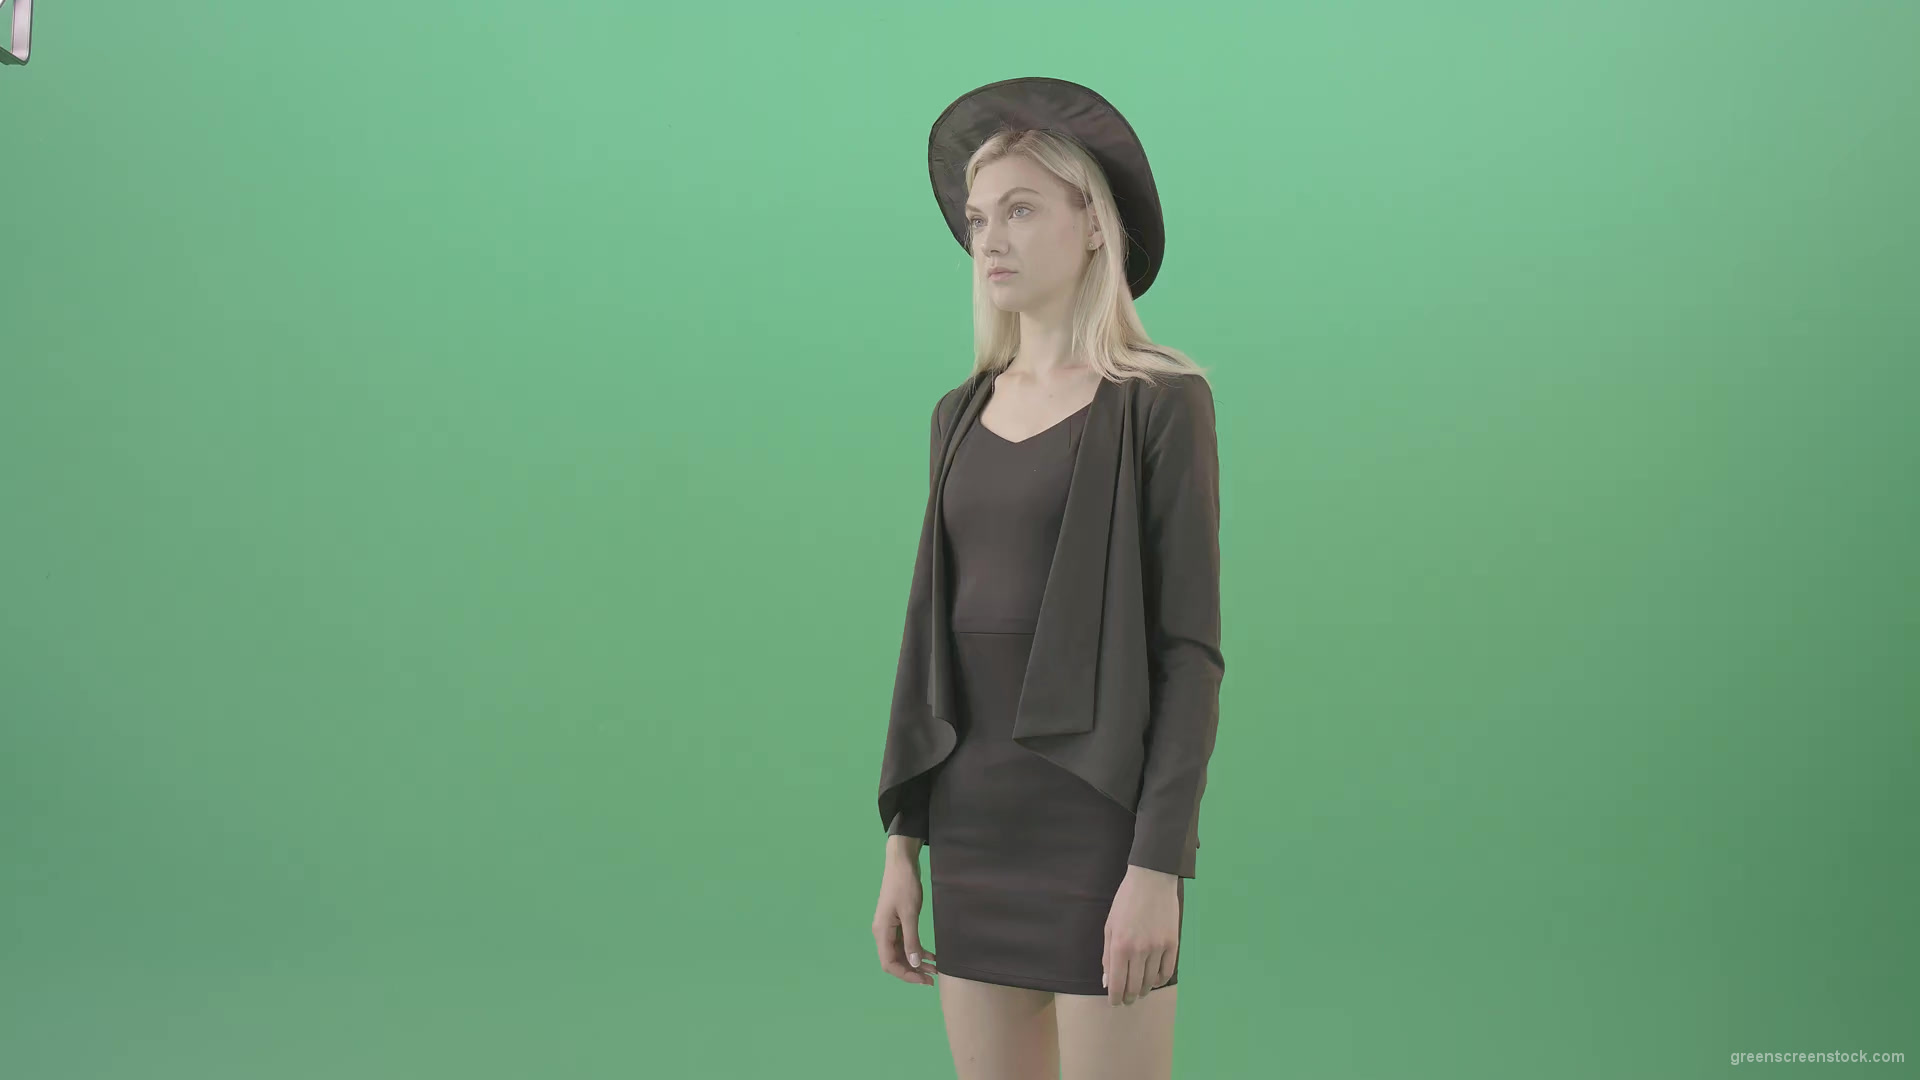 Blonde-Girl-in-Cap-choosing-virtual-products-on-touch-screen-4K-Green-Screen-Video-Footage-1920_001 Green Screen Stock